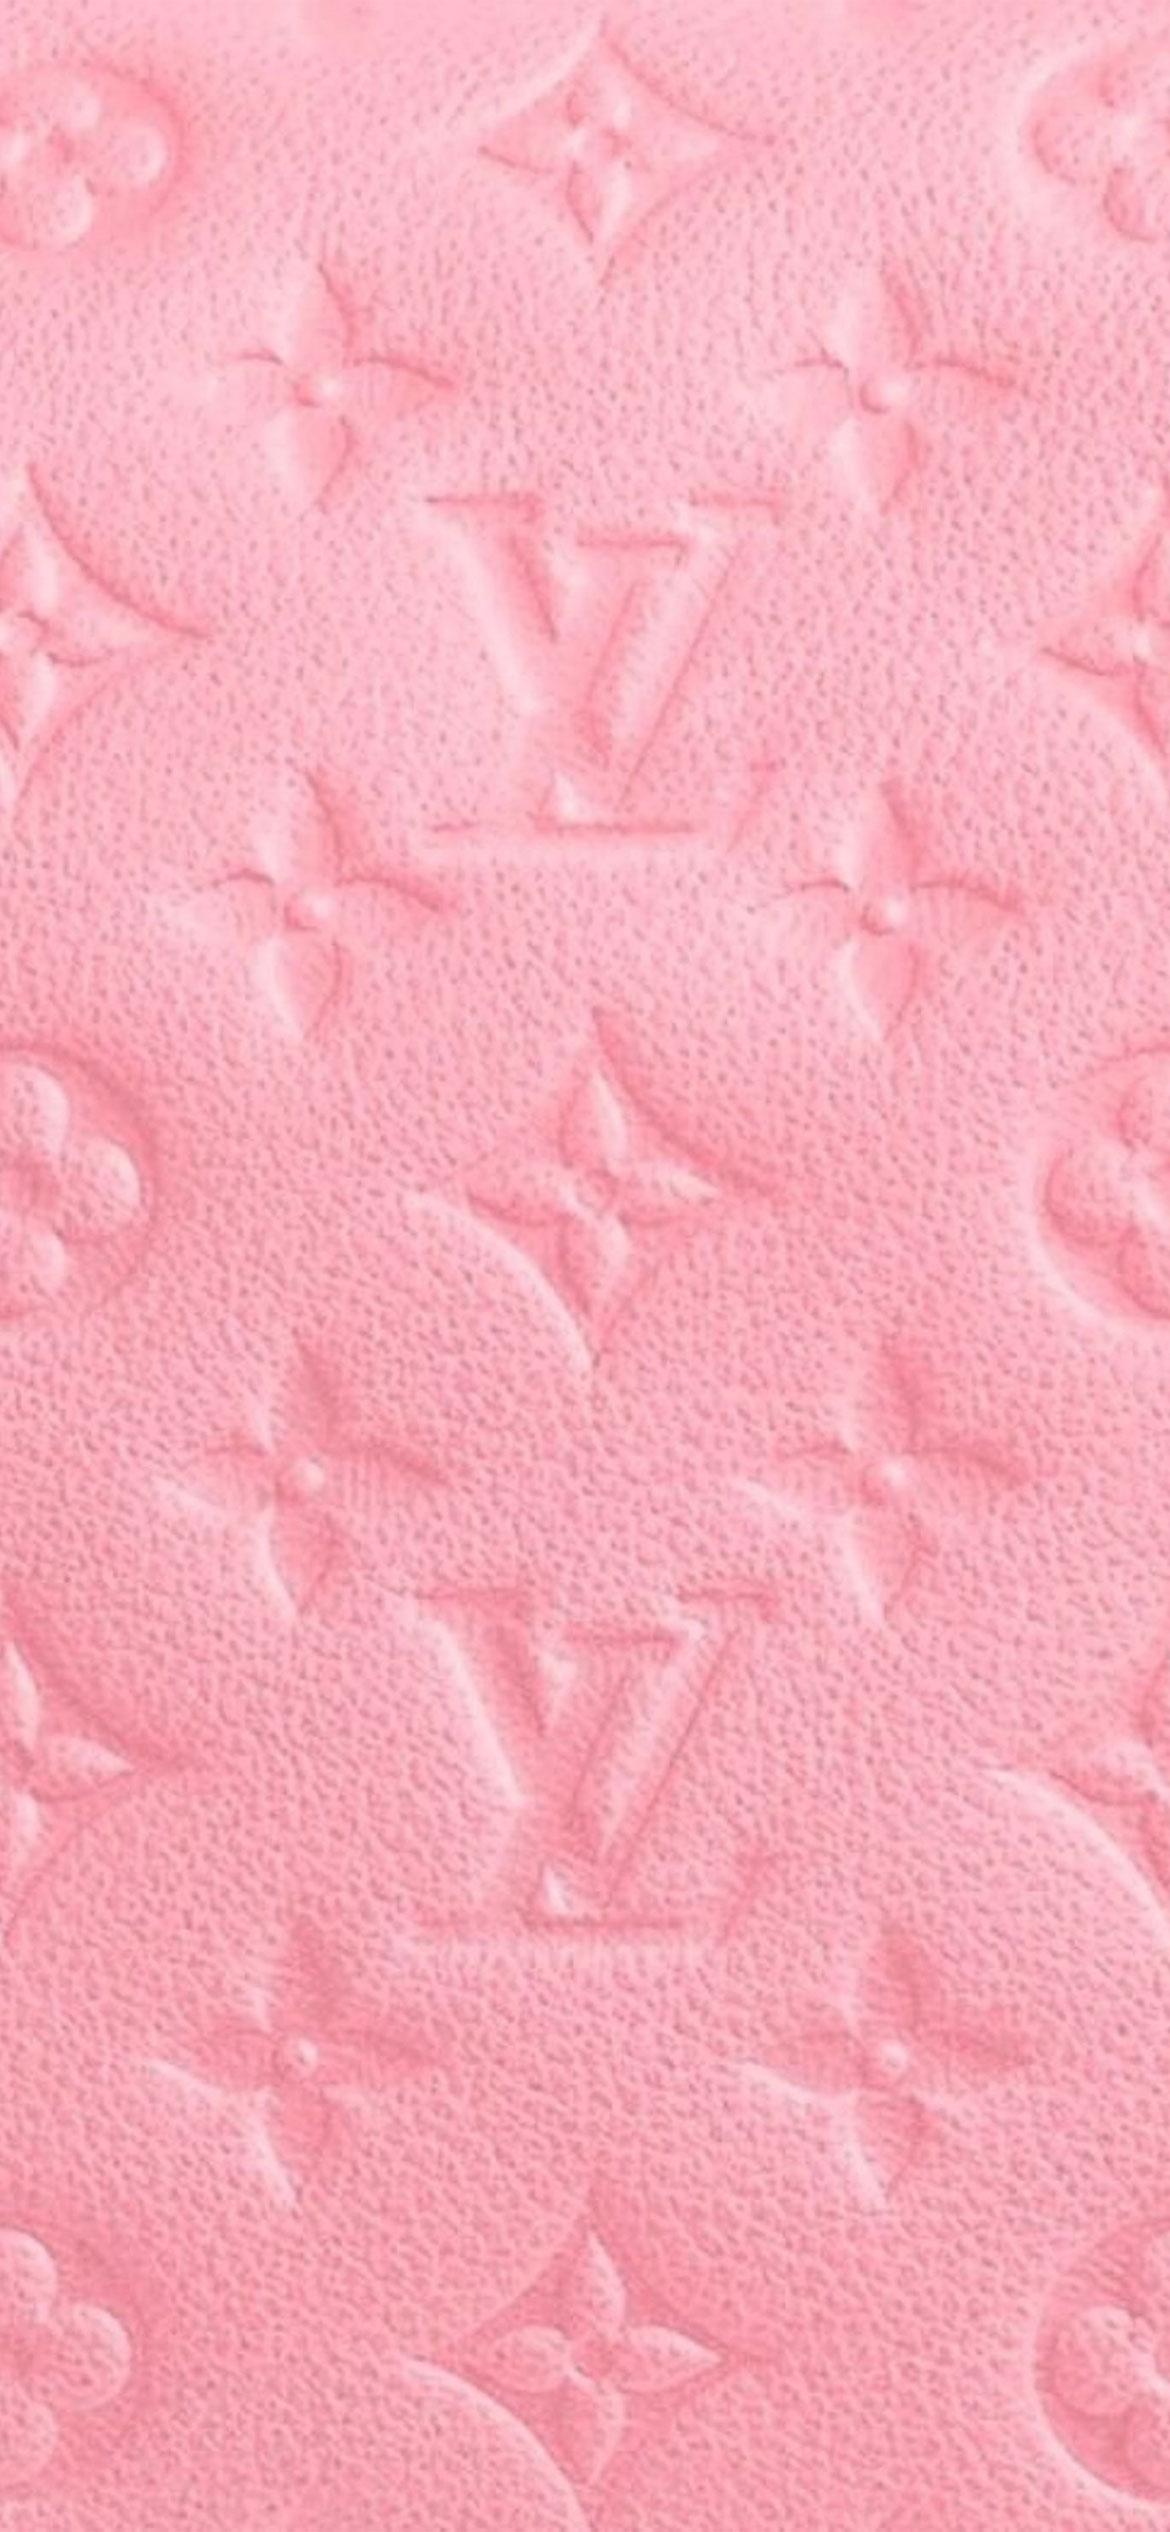 Louis Vuitton pink wallpaper by Amy11_official - Download on ZEDGE™